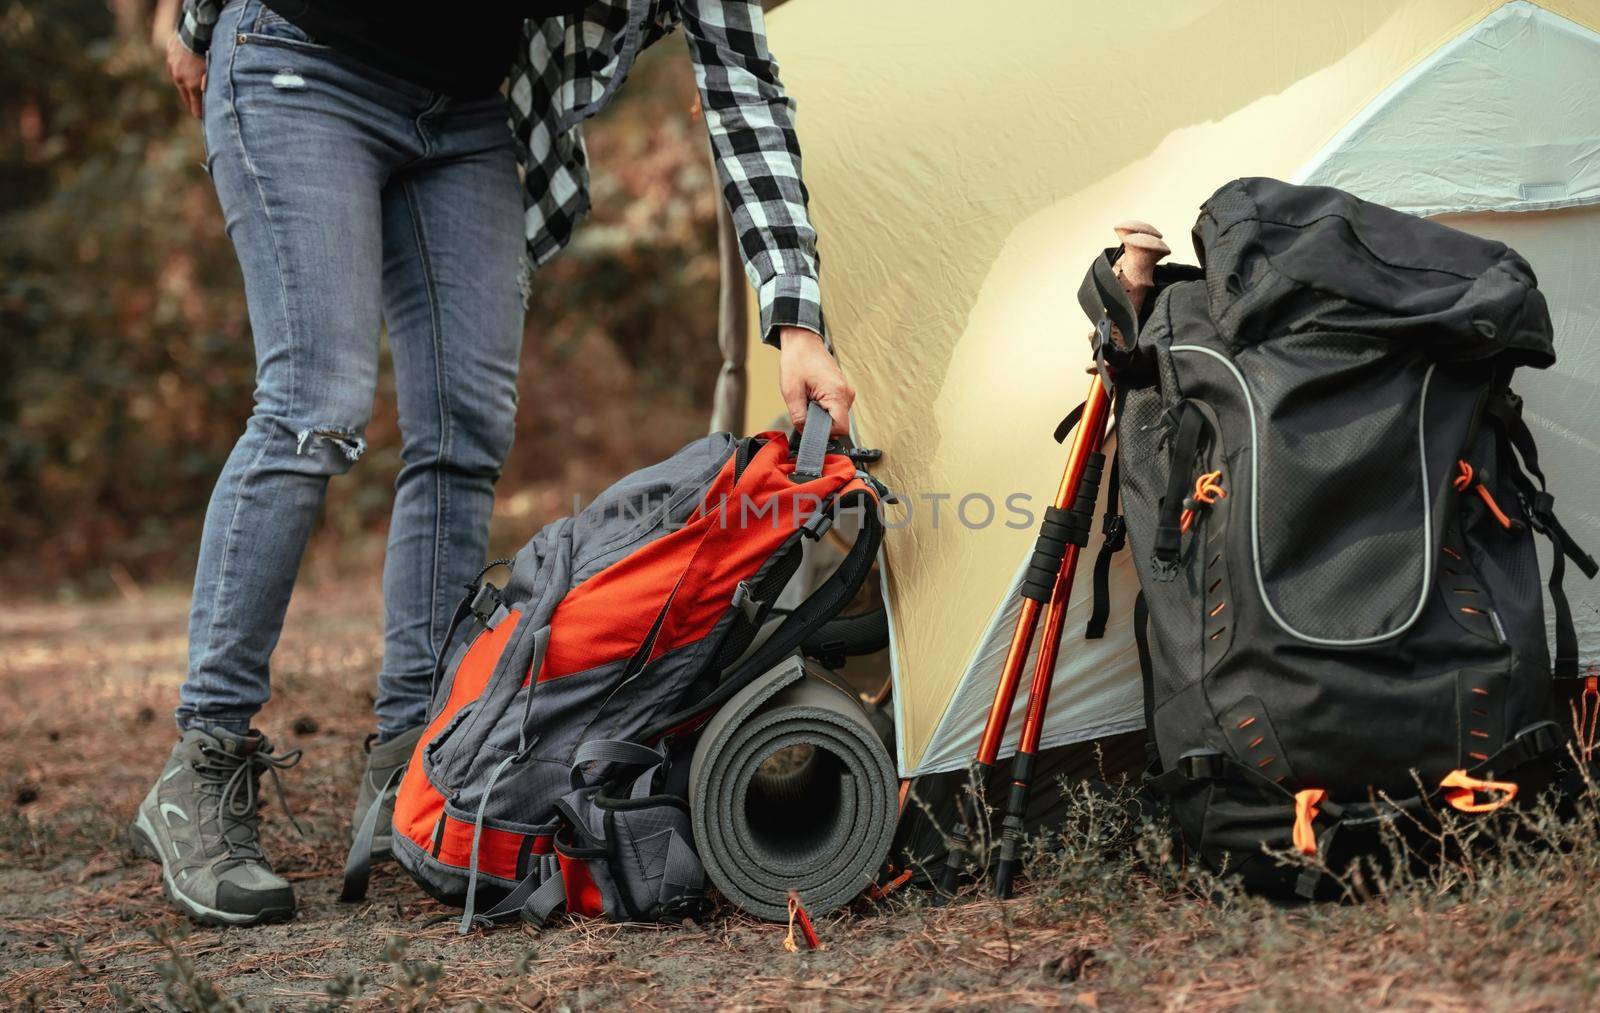 Person preparing to hiking and put on the ground backppacks and karemat close to tent in camping place in the forest. View on travel touristic hiking equipment outdoor